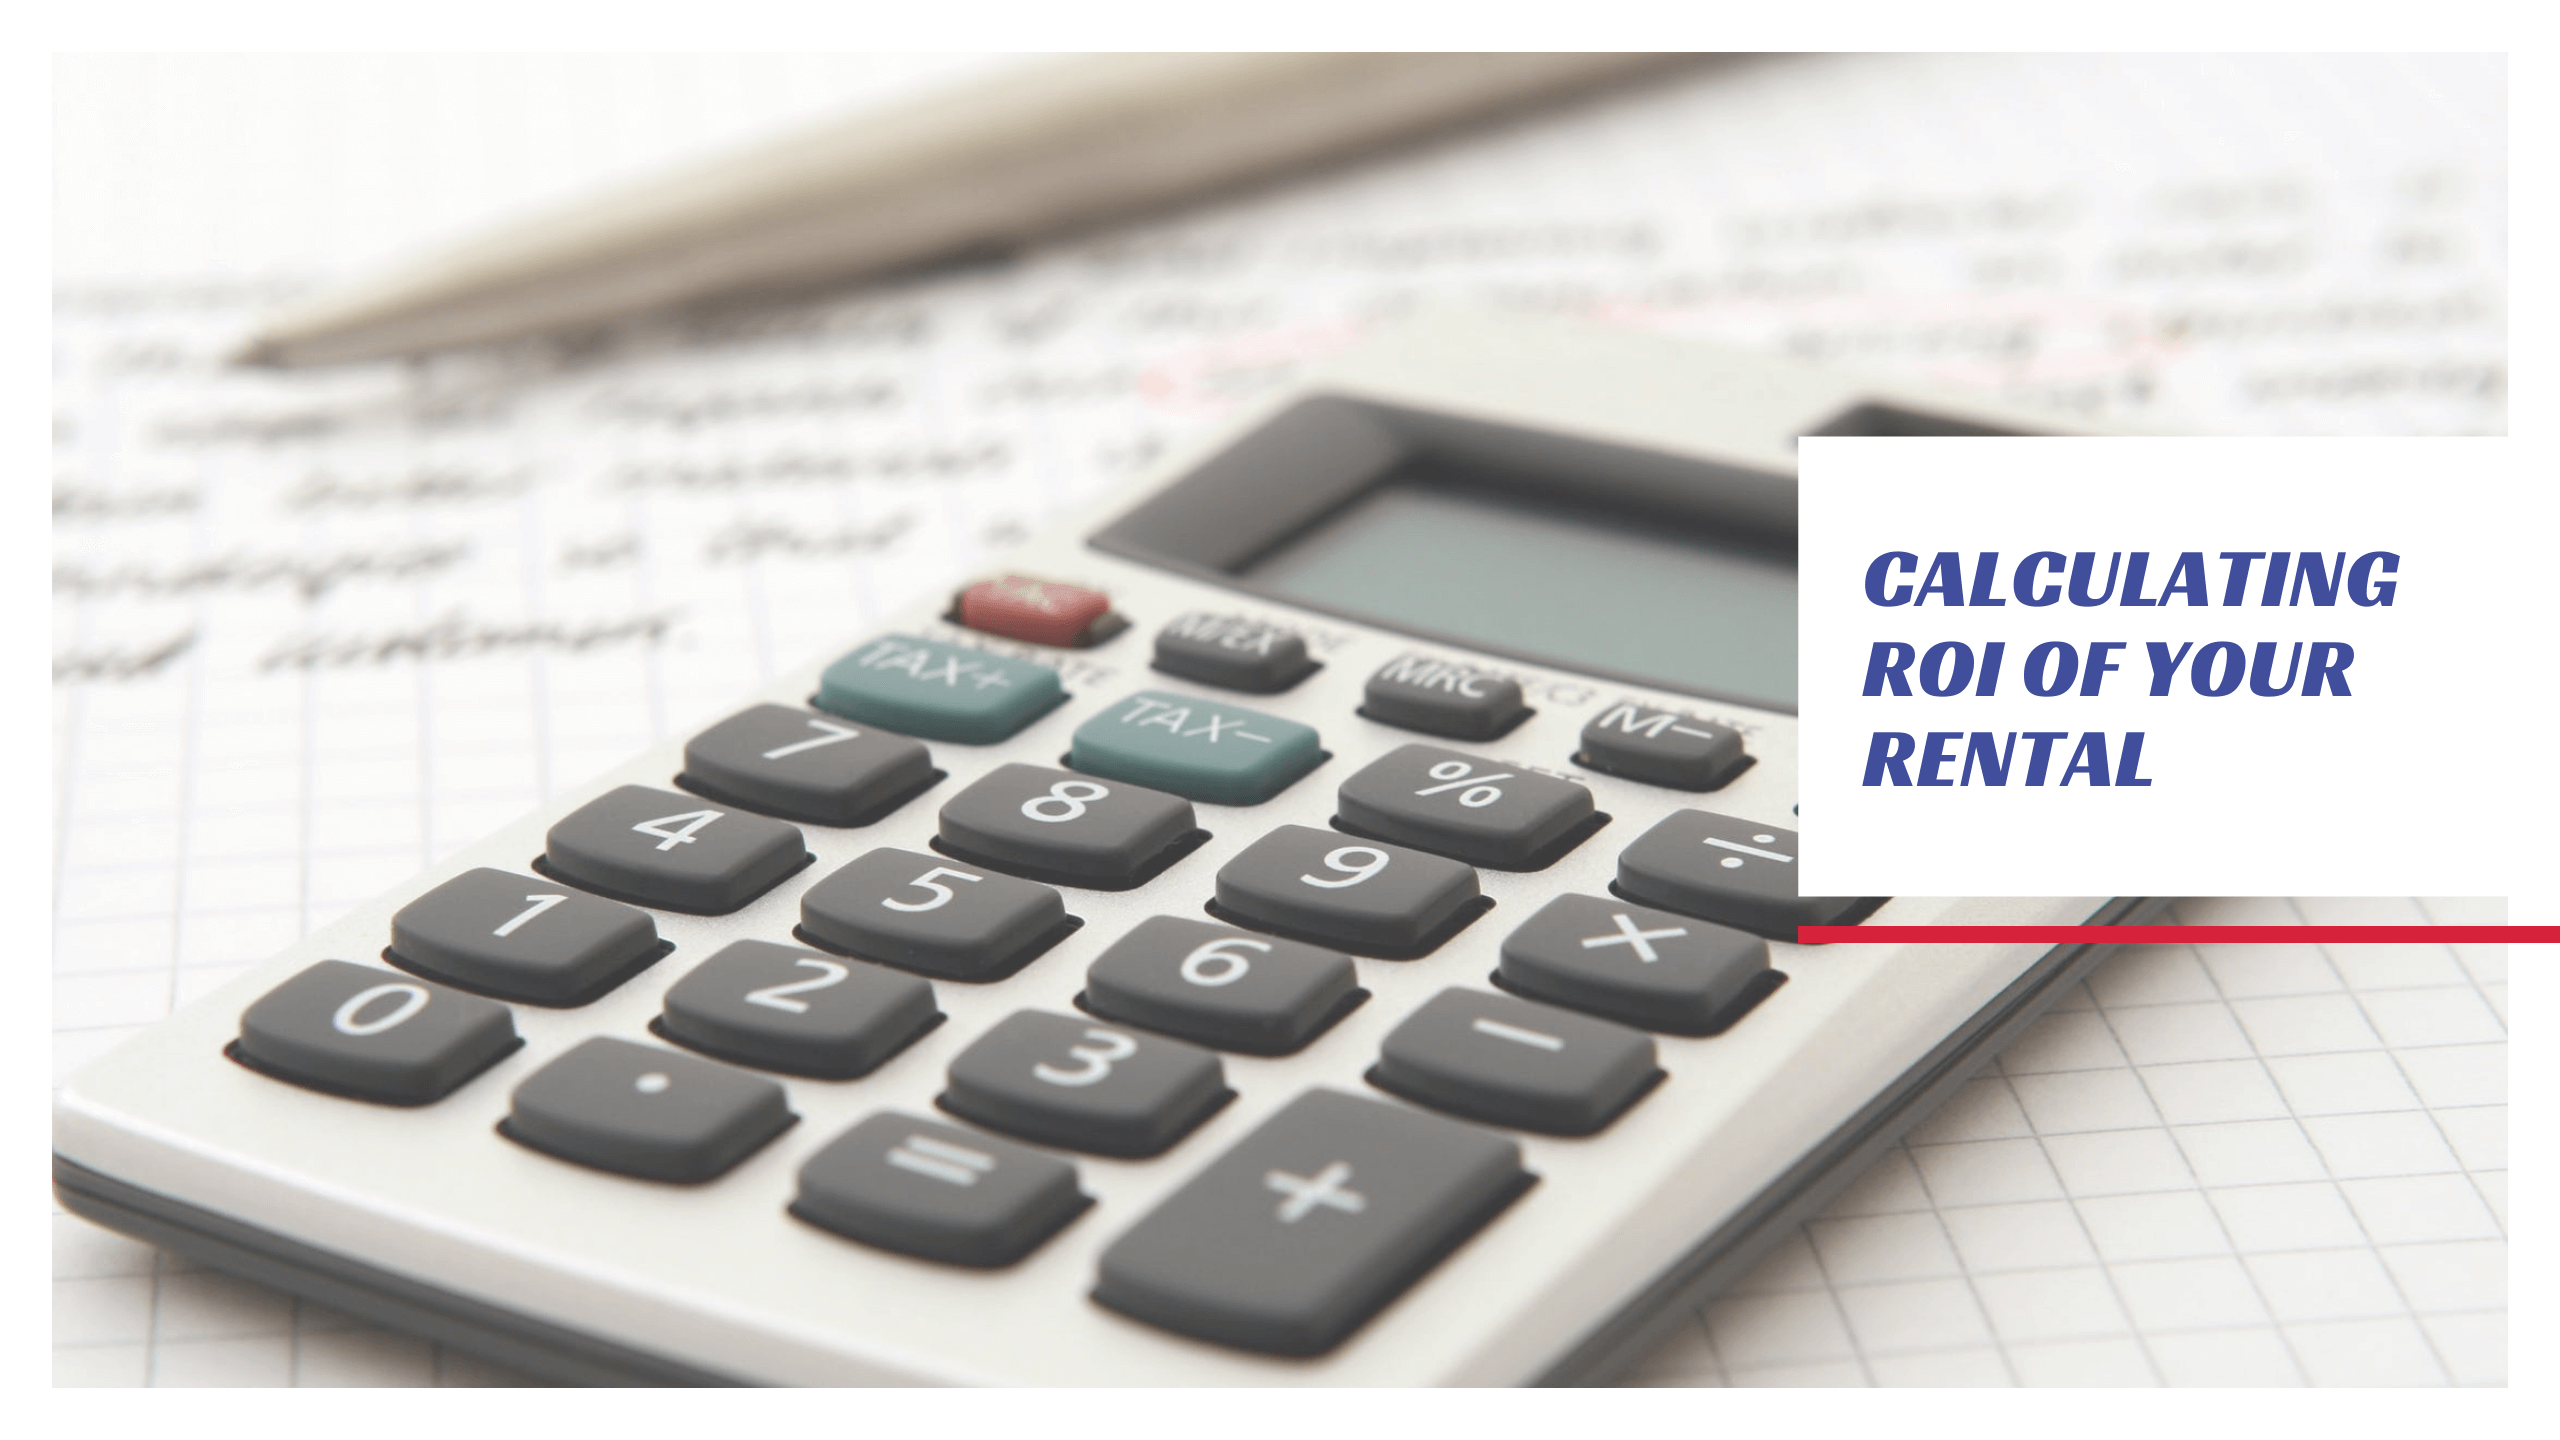 How to Calculate the ROI of Your Orlando Property Investment